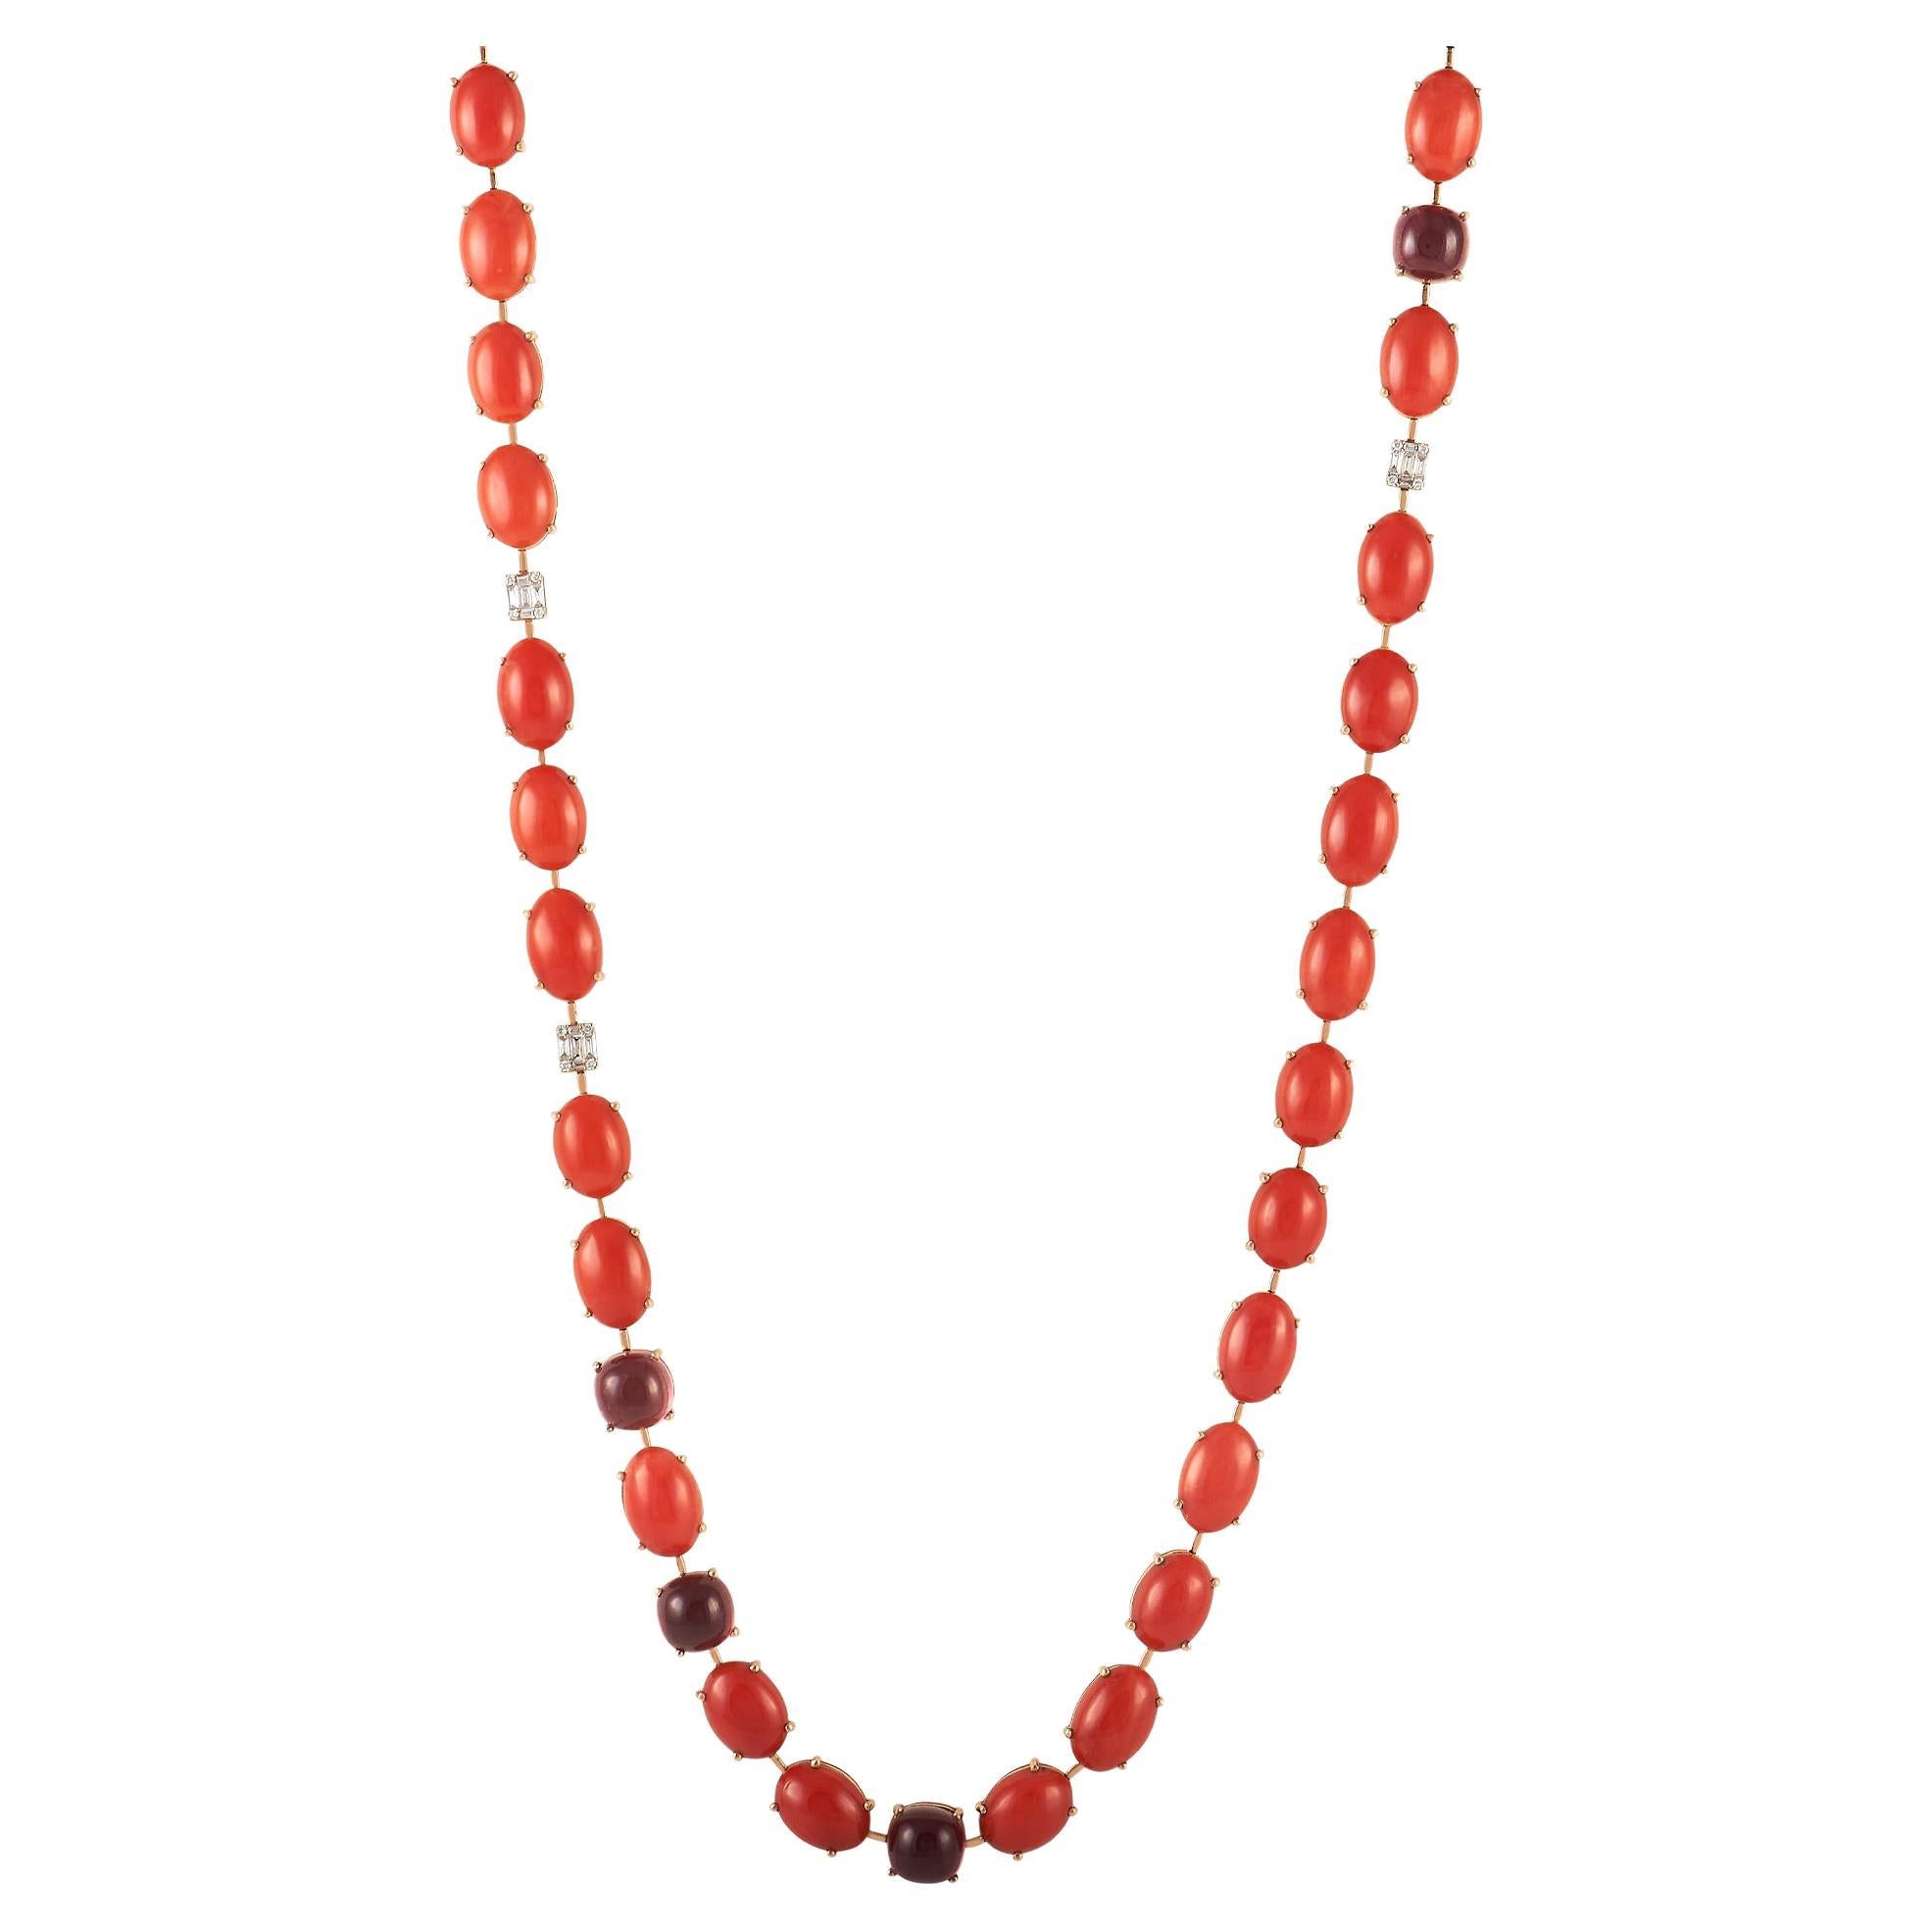 Zydo 18K Rose Gold 0.56 Ct Diamond, Coral and Tourmaline Necklace For Sale